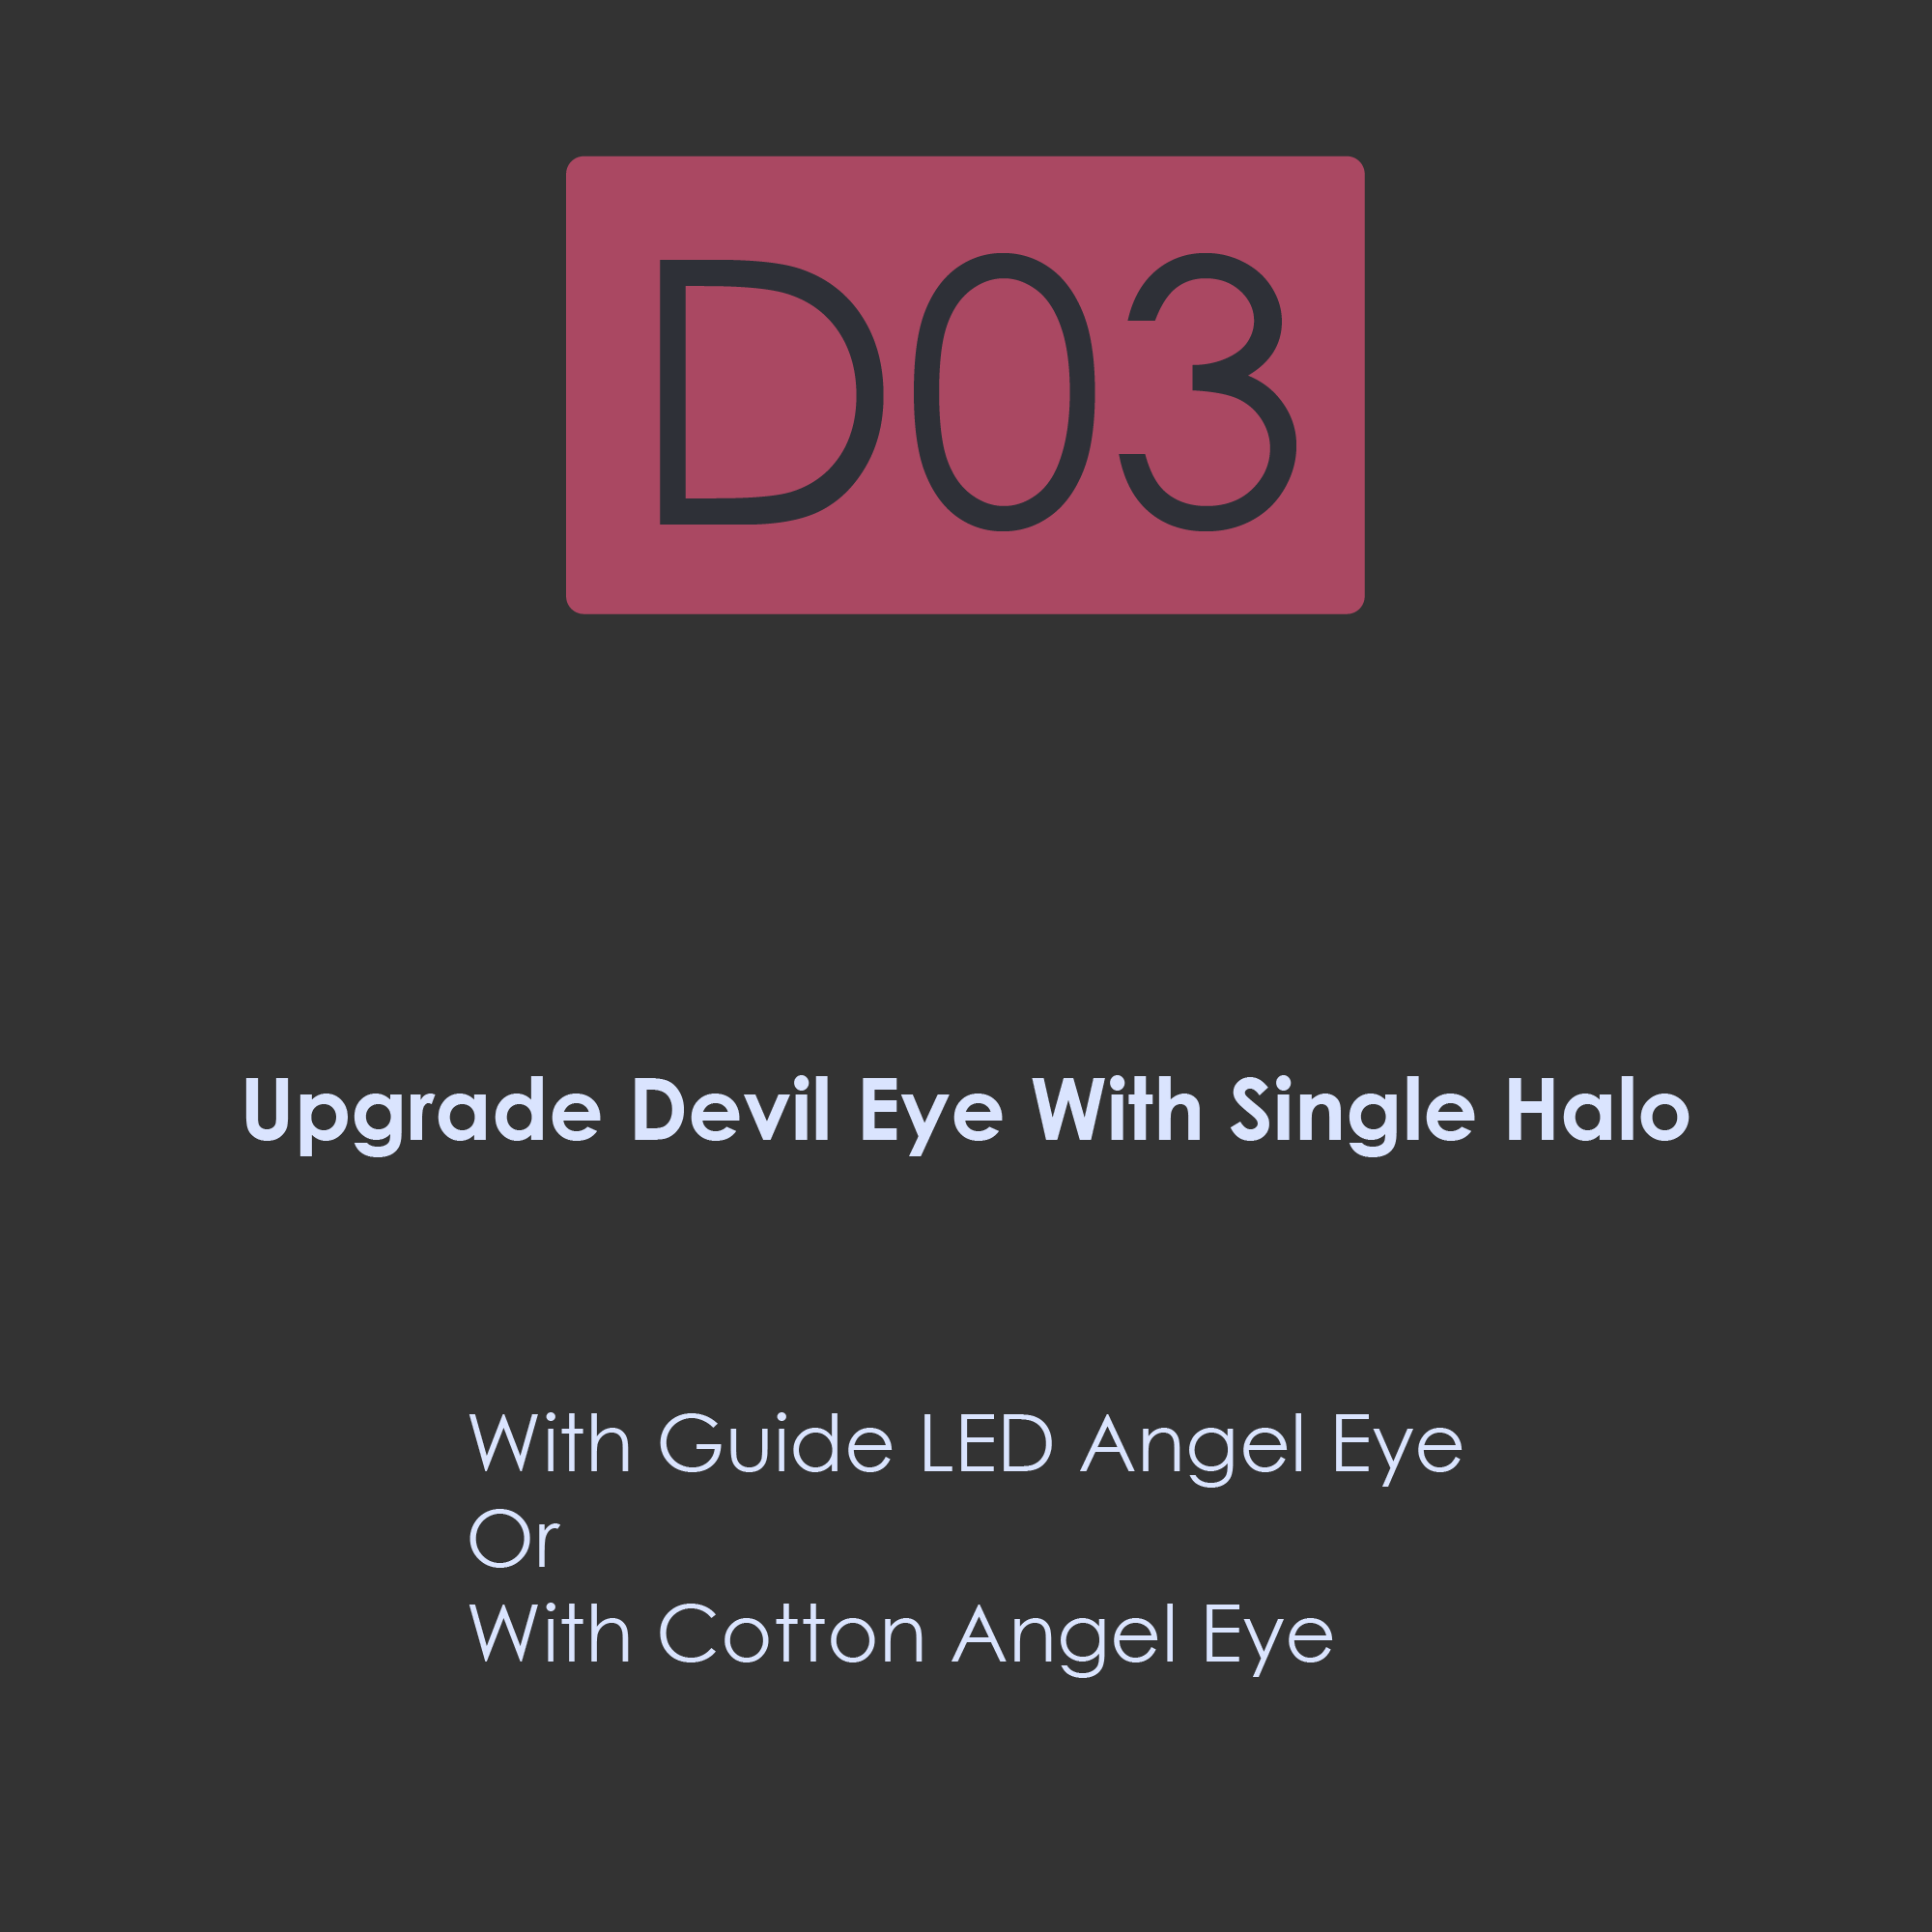 D02-Upgrade Devil Eye With Single Color Guide Light Halos